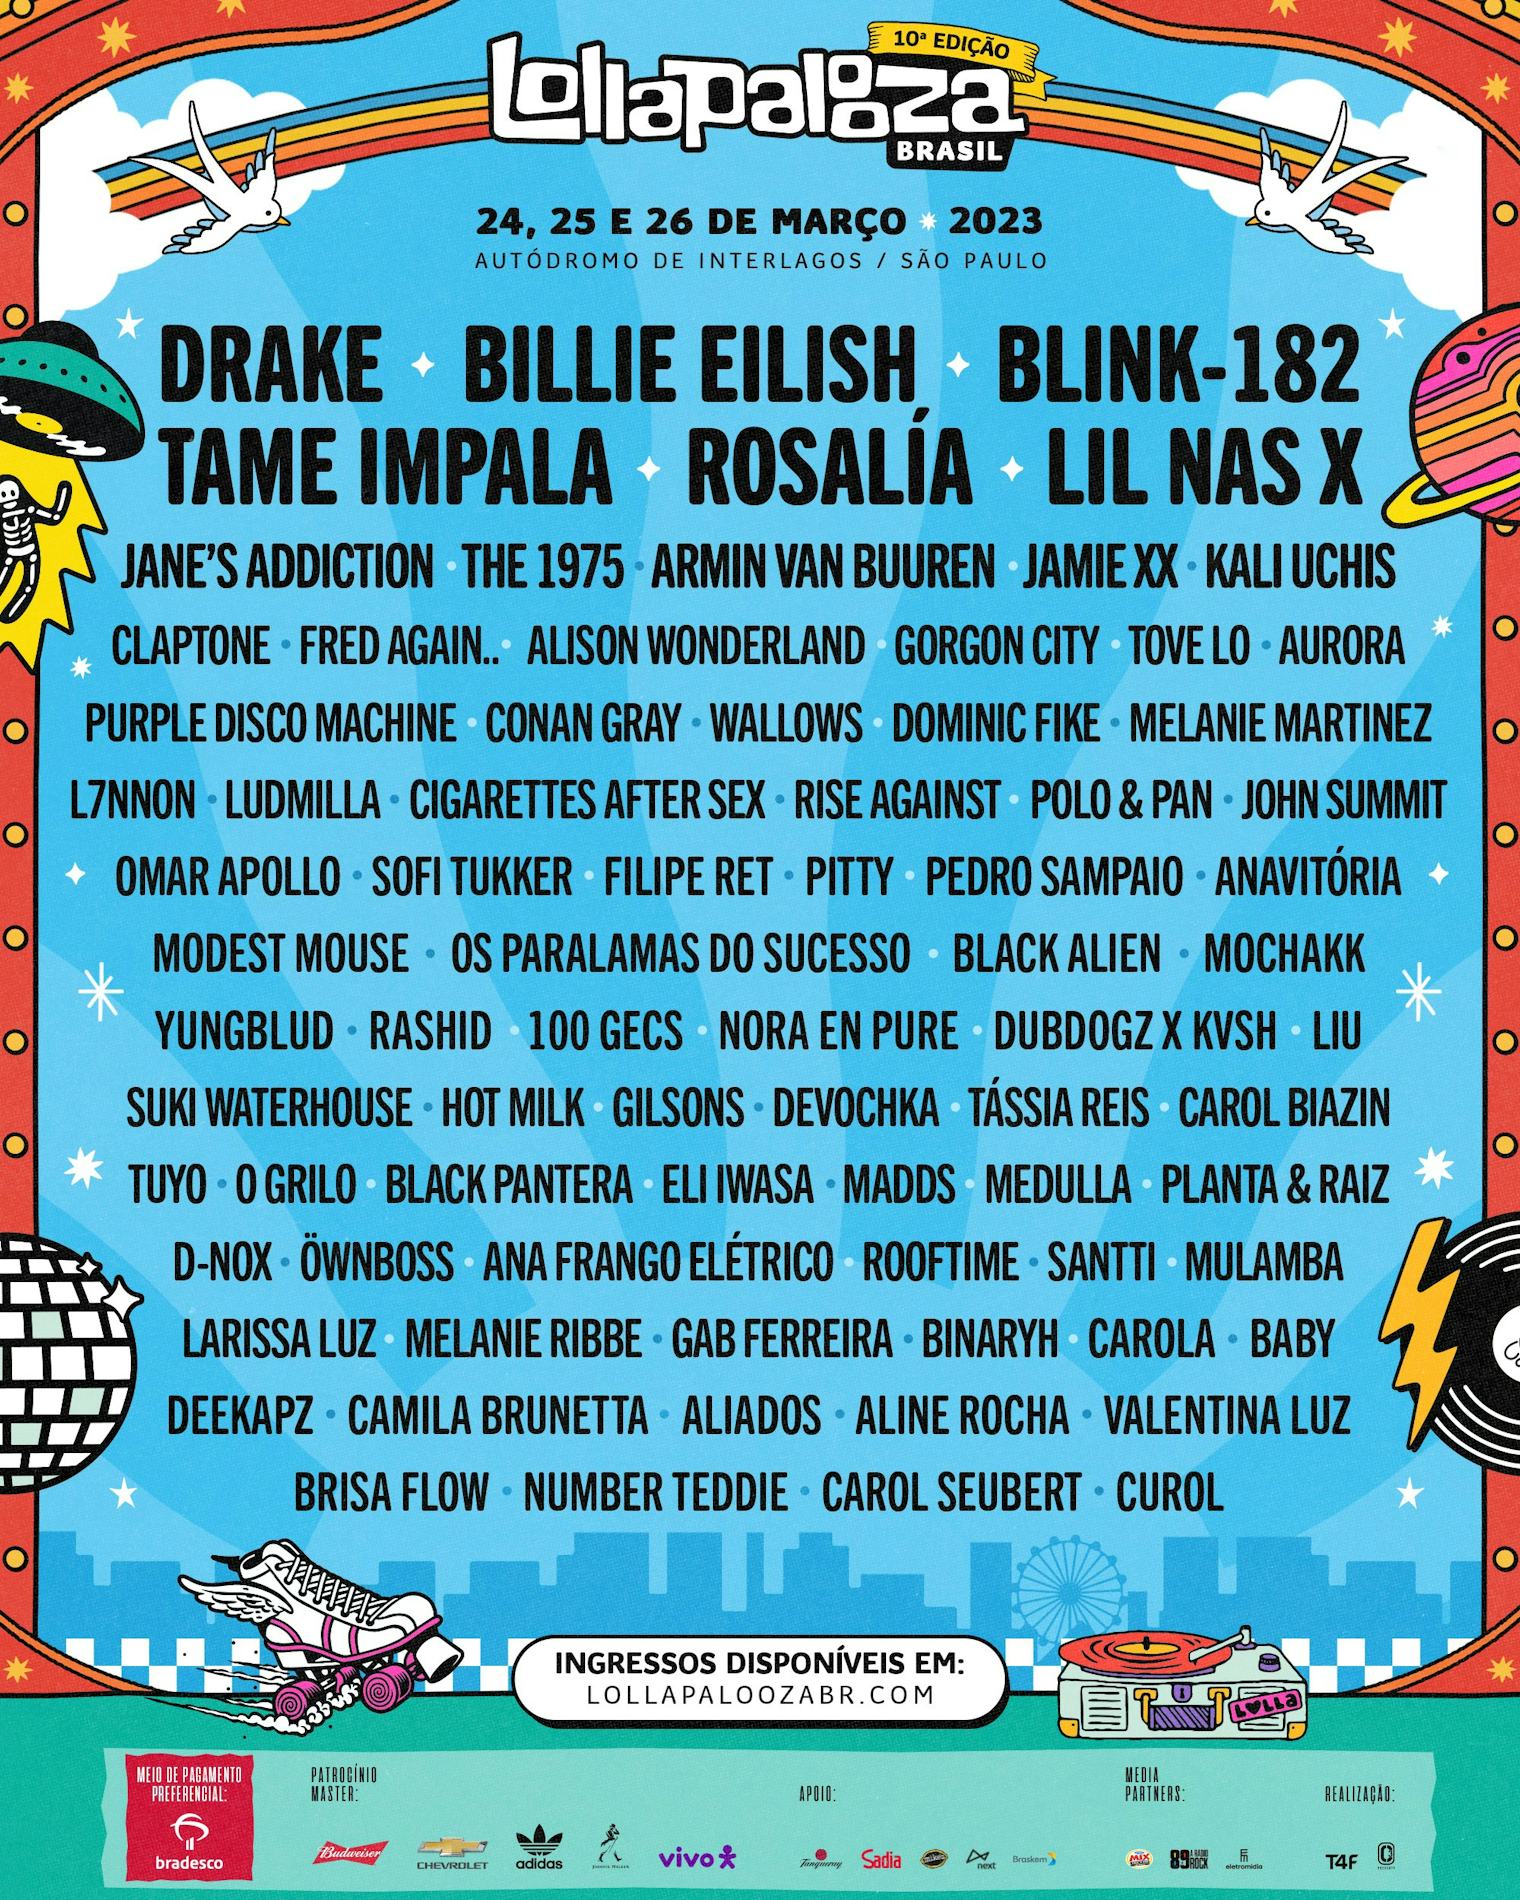 Lollapalooza's 2023 South America Lineup Includes Drake, Blink-182